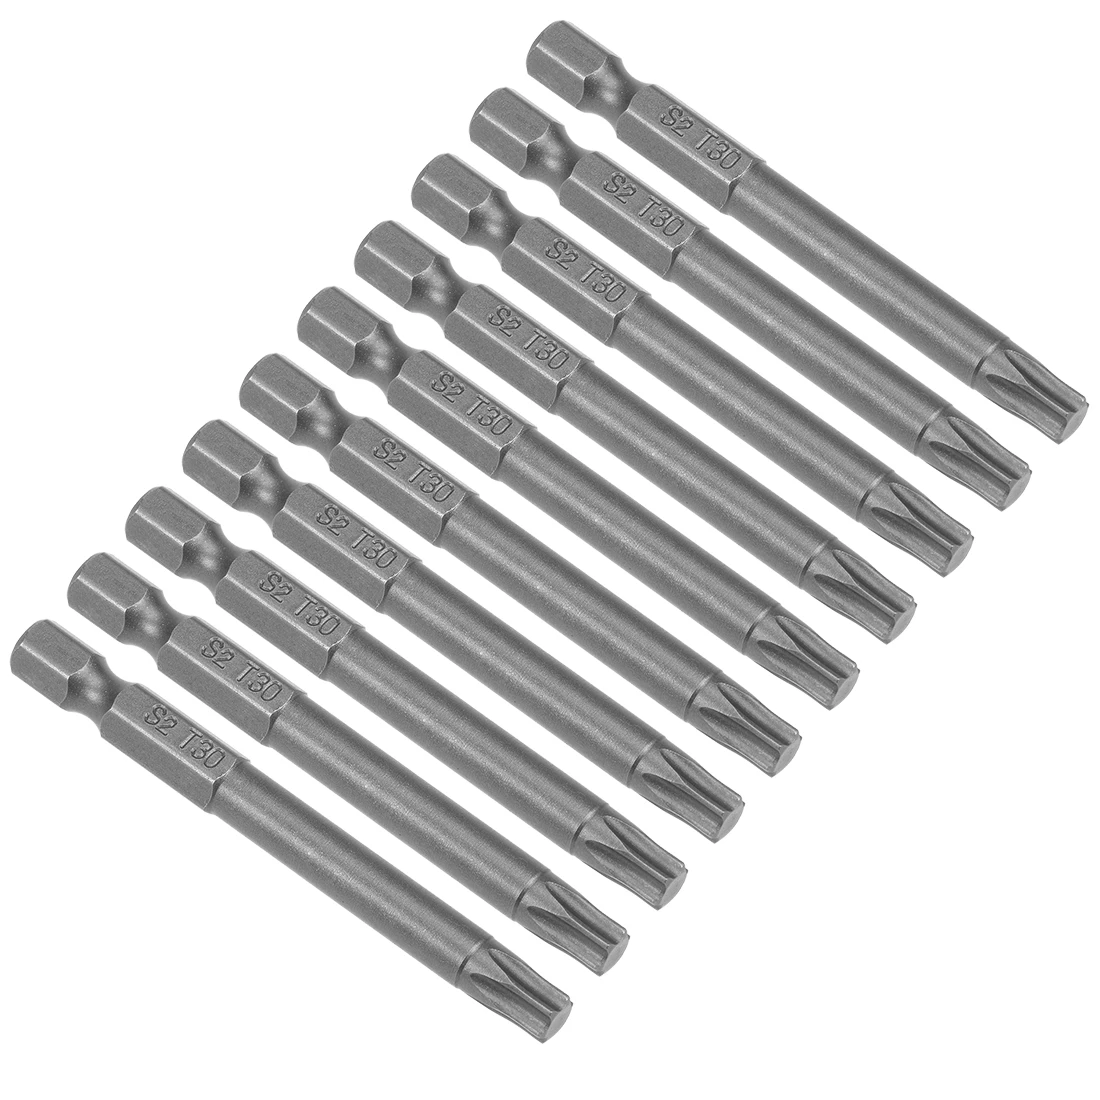 

uxcell 10 Pcs T30 Magnetic Torx Screwdriver Bits, 1/4 Inch Hex Shank 2.56-inch Length S2 Power Tool